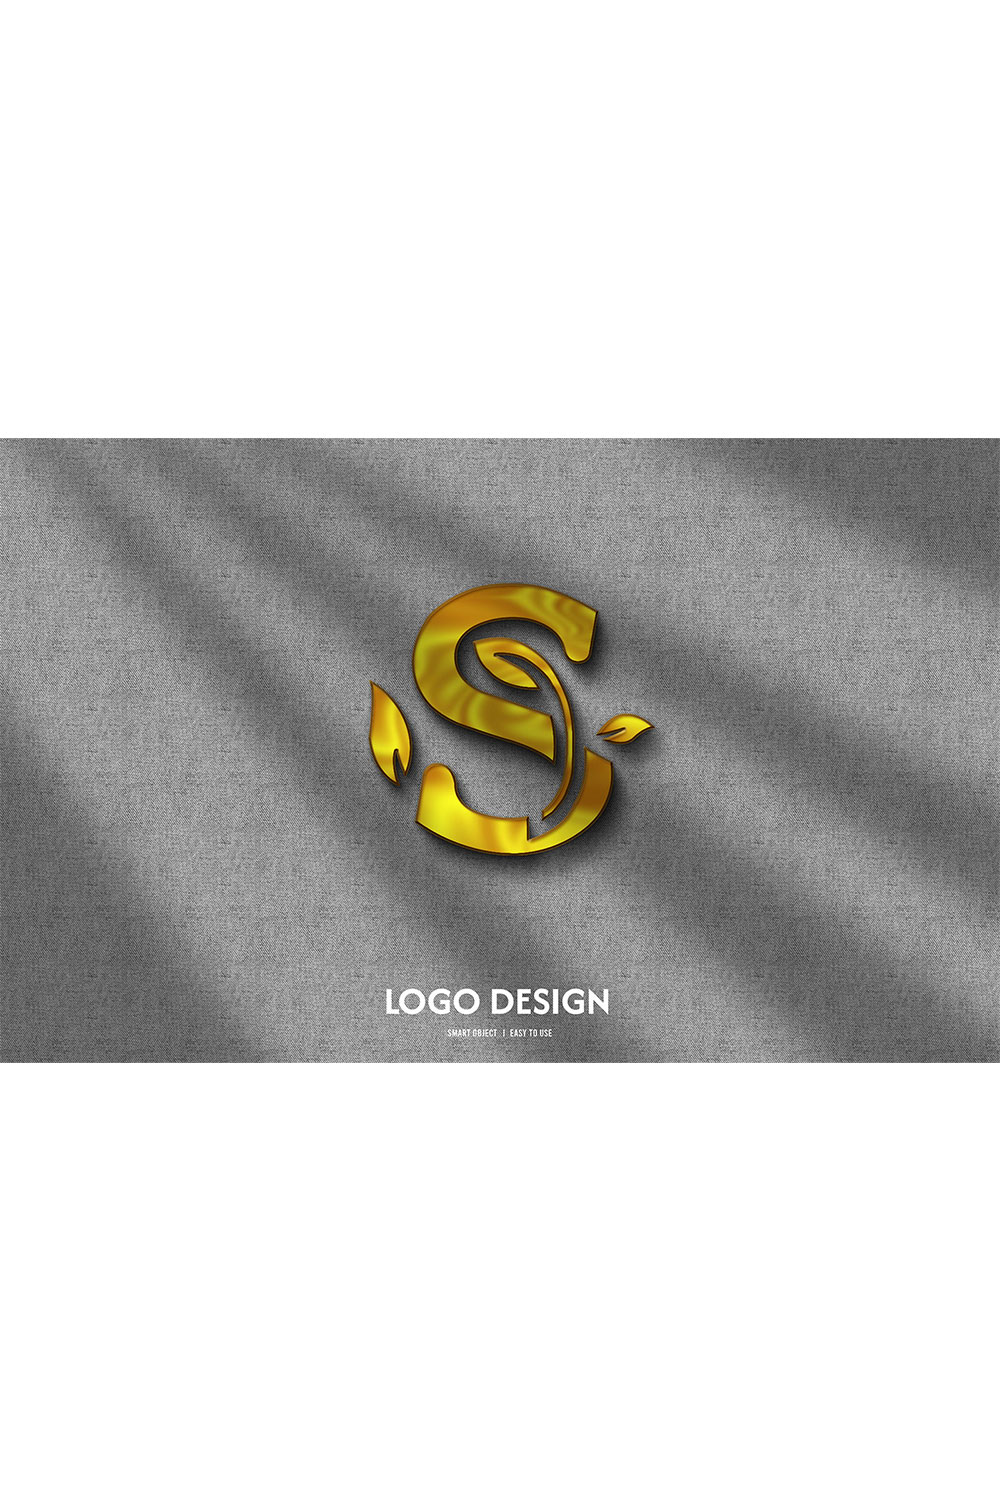 S Steps Logo Template pinterest preview image.